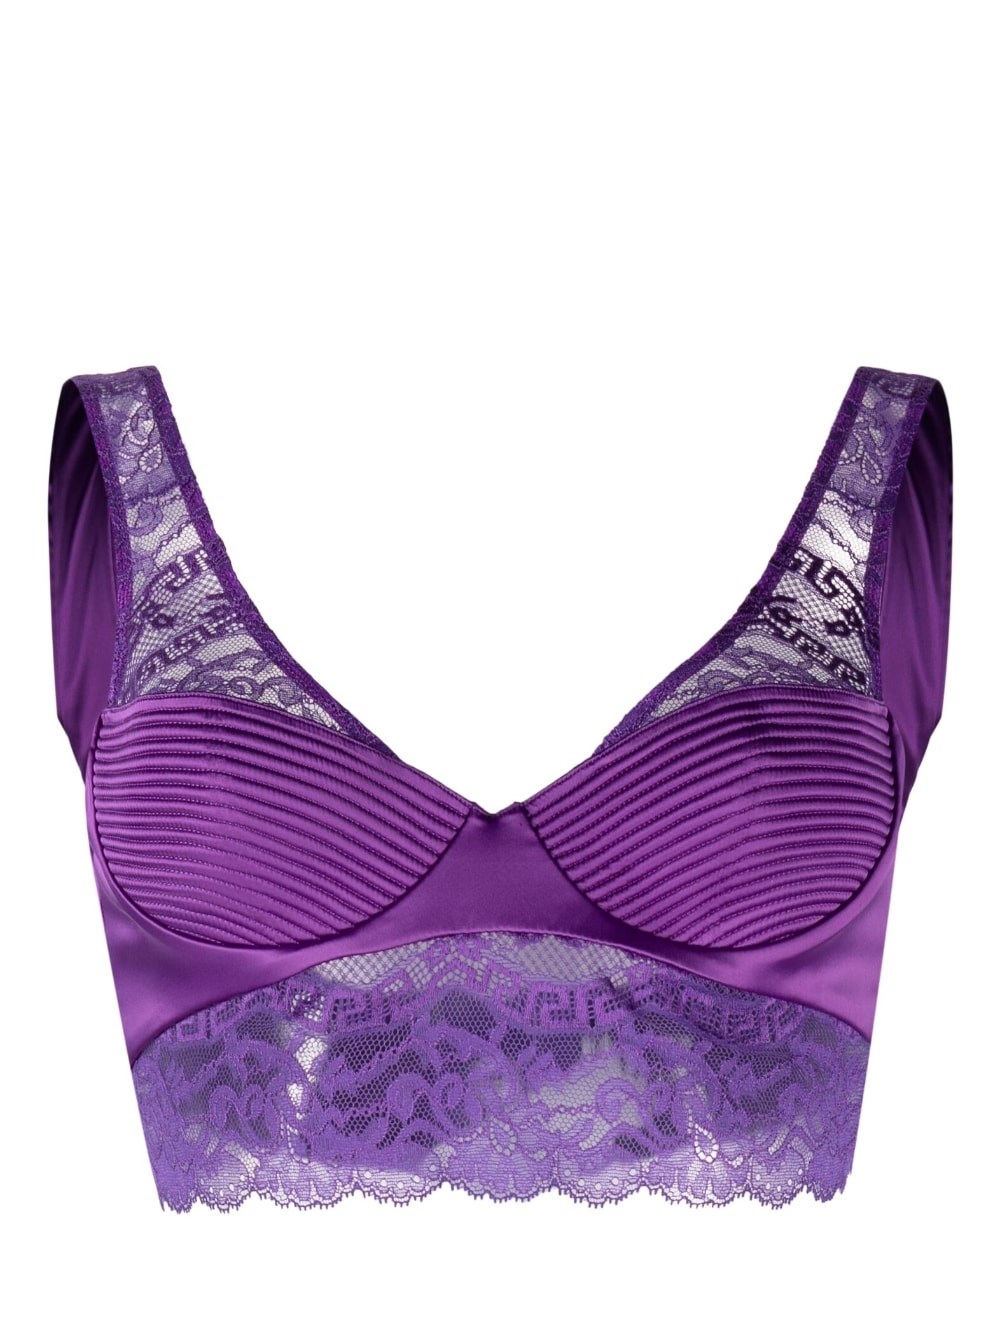 VERSACE BRALETTE TOP WITH LACE DETAILS